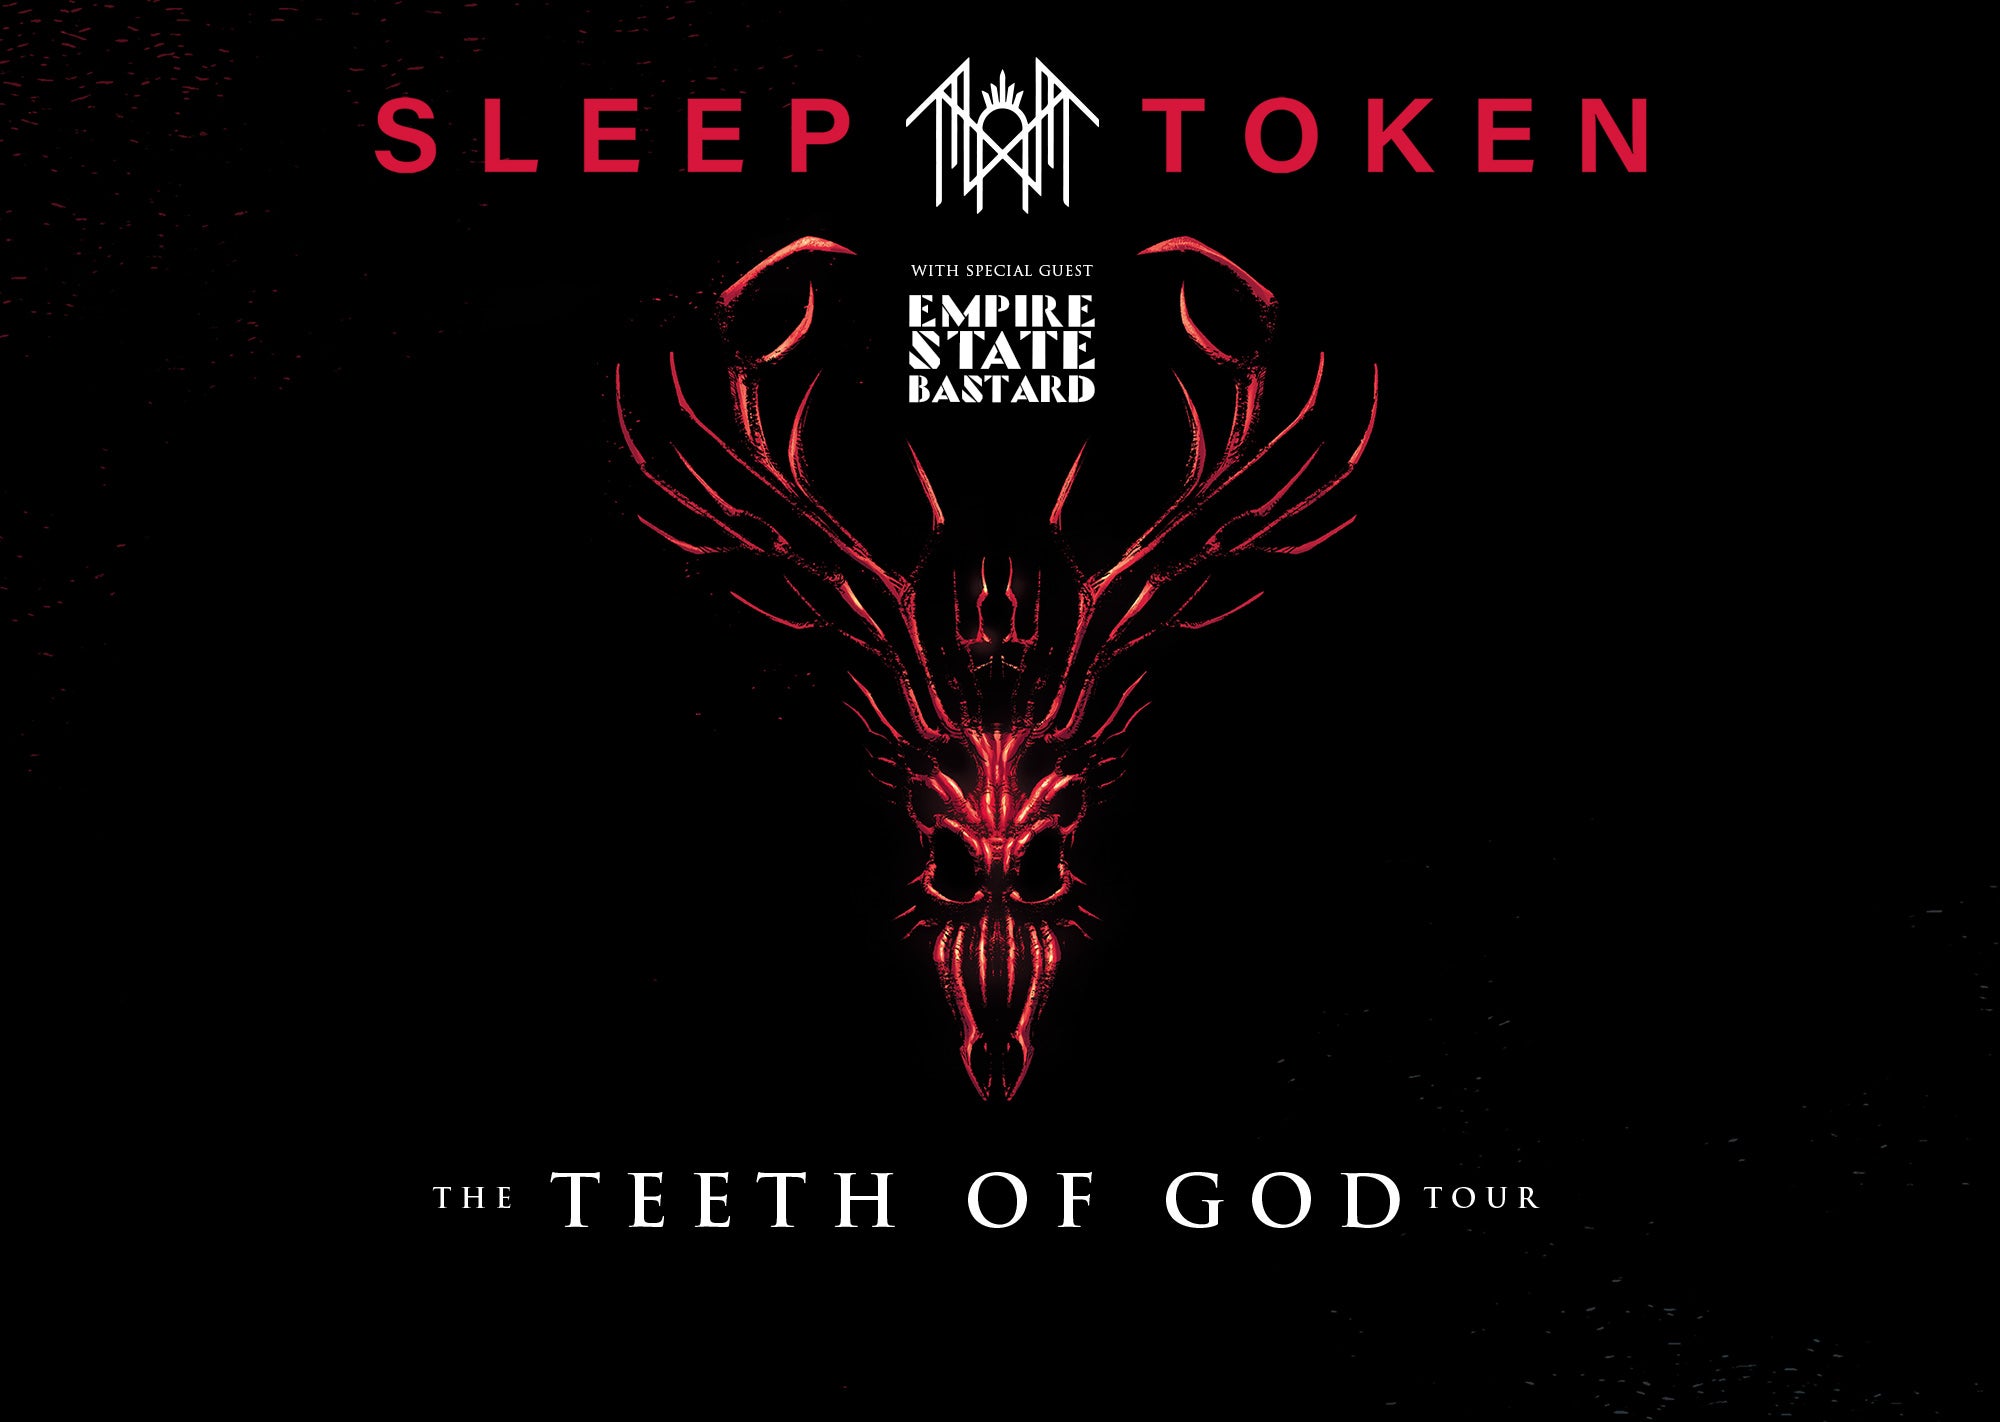 Sleep Token brings The Teeth of God Tour to H-E-B Center on May 3